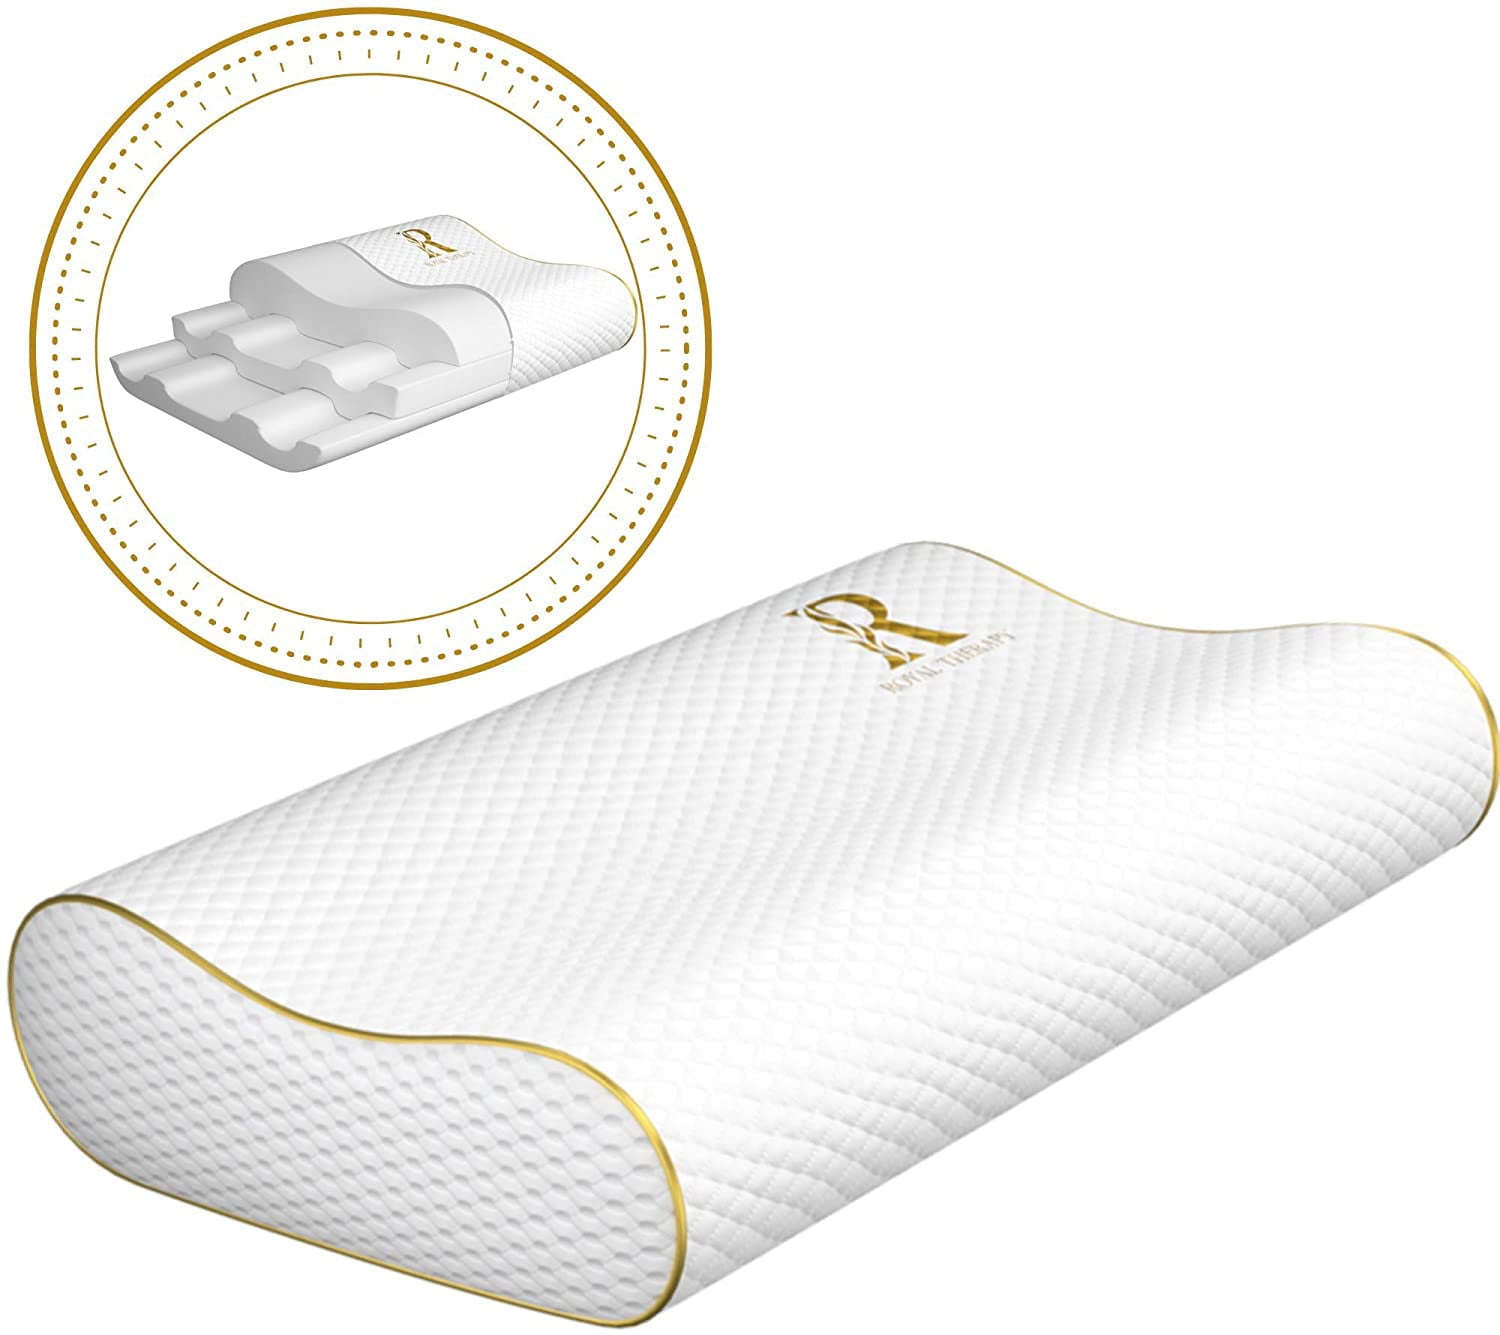 Royal Therapy Queen Memory Foam Pillow + Extra Pillowcase, Bed Pillow or Neck & Shoulder, Support for Back, Stomach, Side Sleepers, Orthopedic Contour Pillow, Bamboo Adjustable